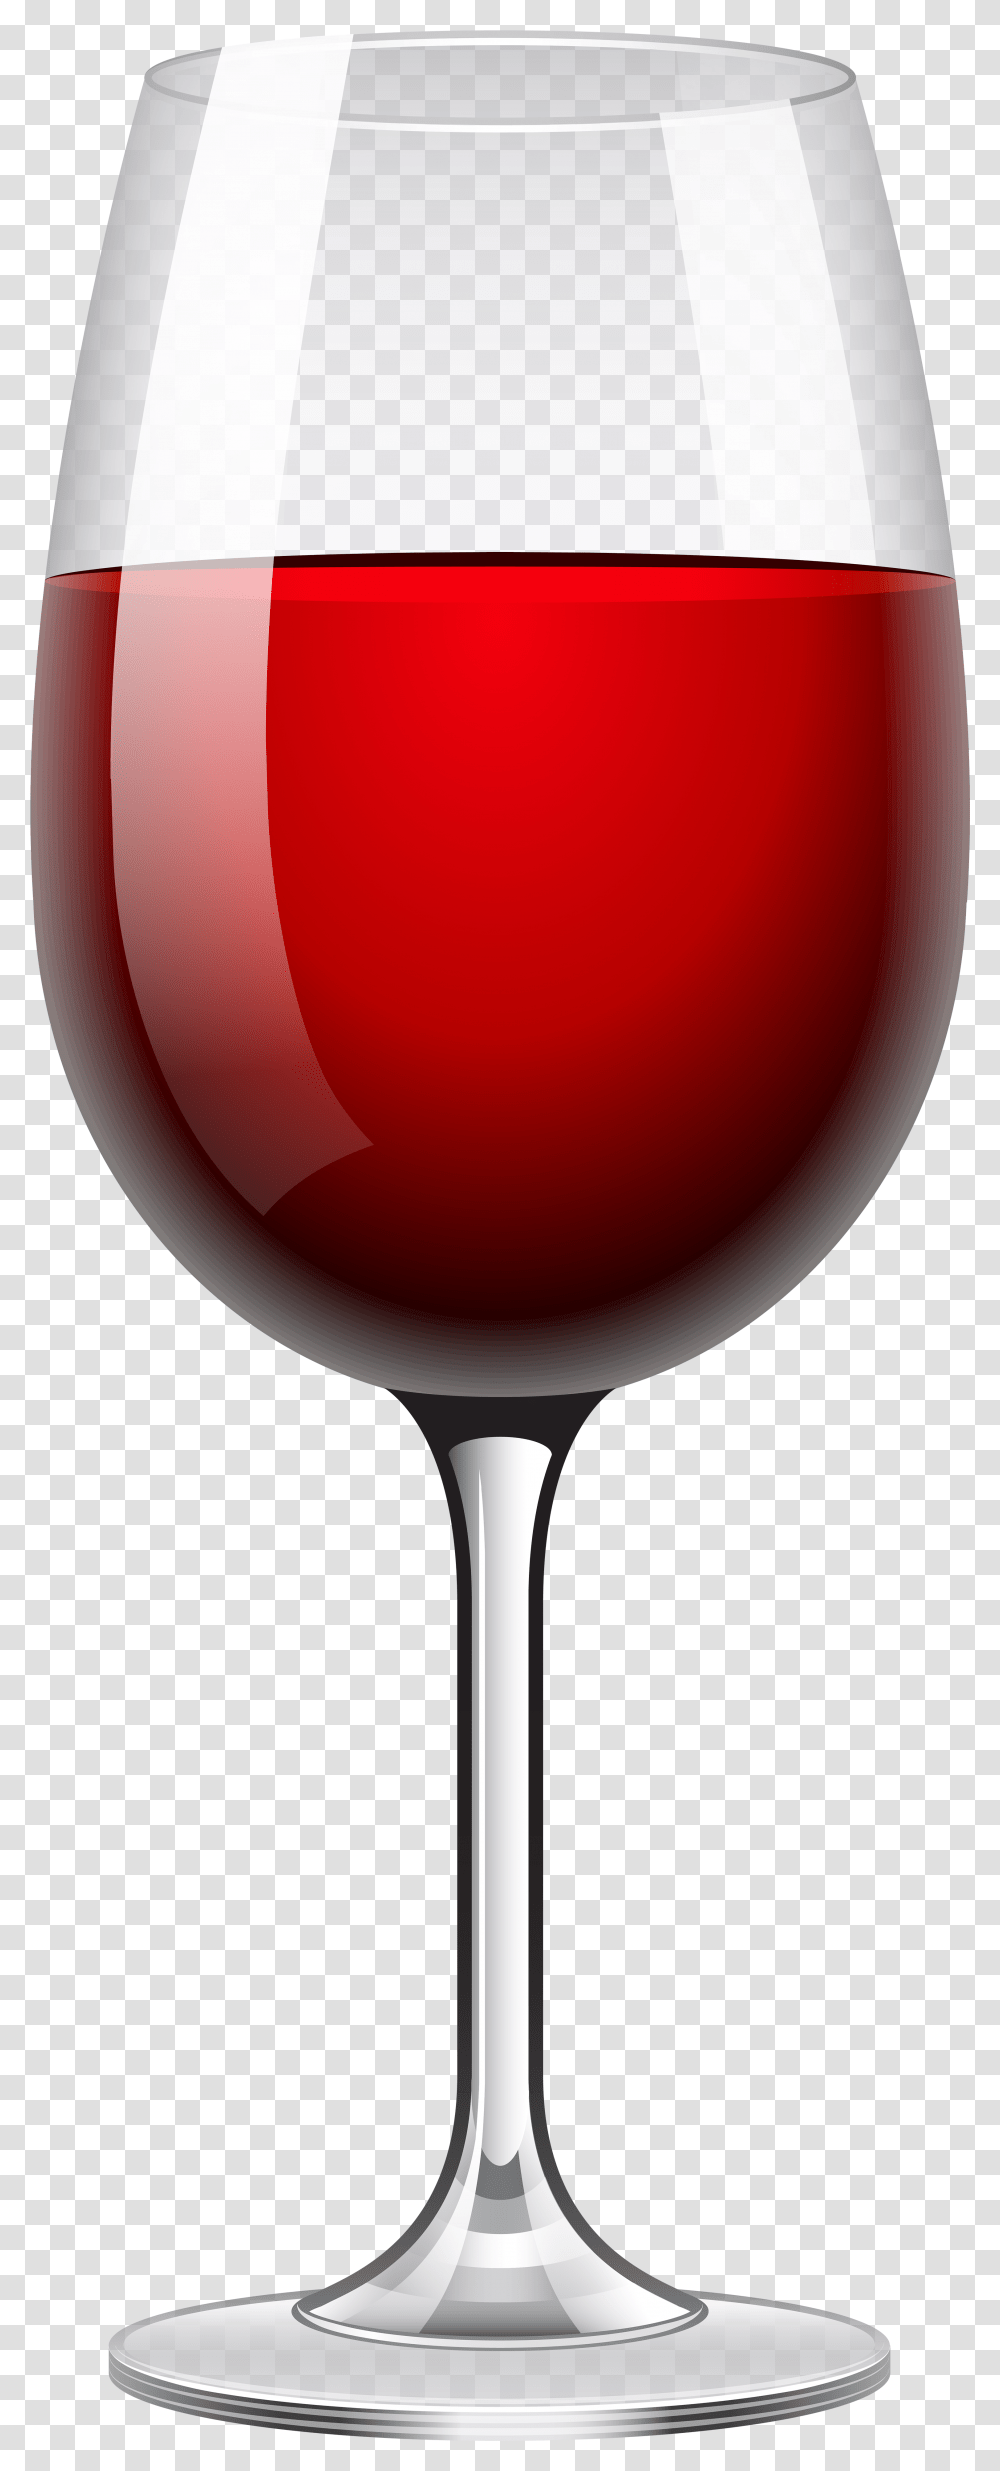 Red Wine White Wine Champagne Wine Glass Red Wine Glass Emoji, Lamp, Alcohol, Beverage, Drink Transparent Png